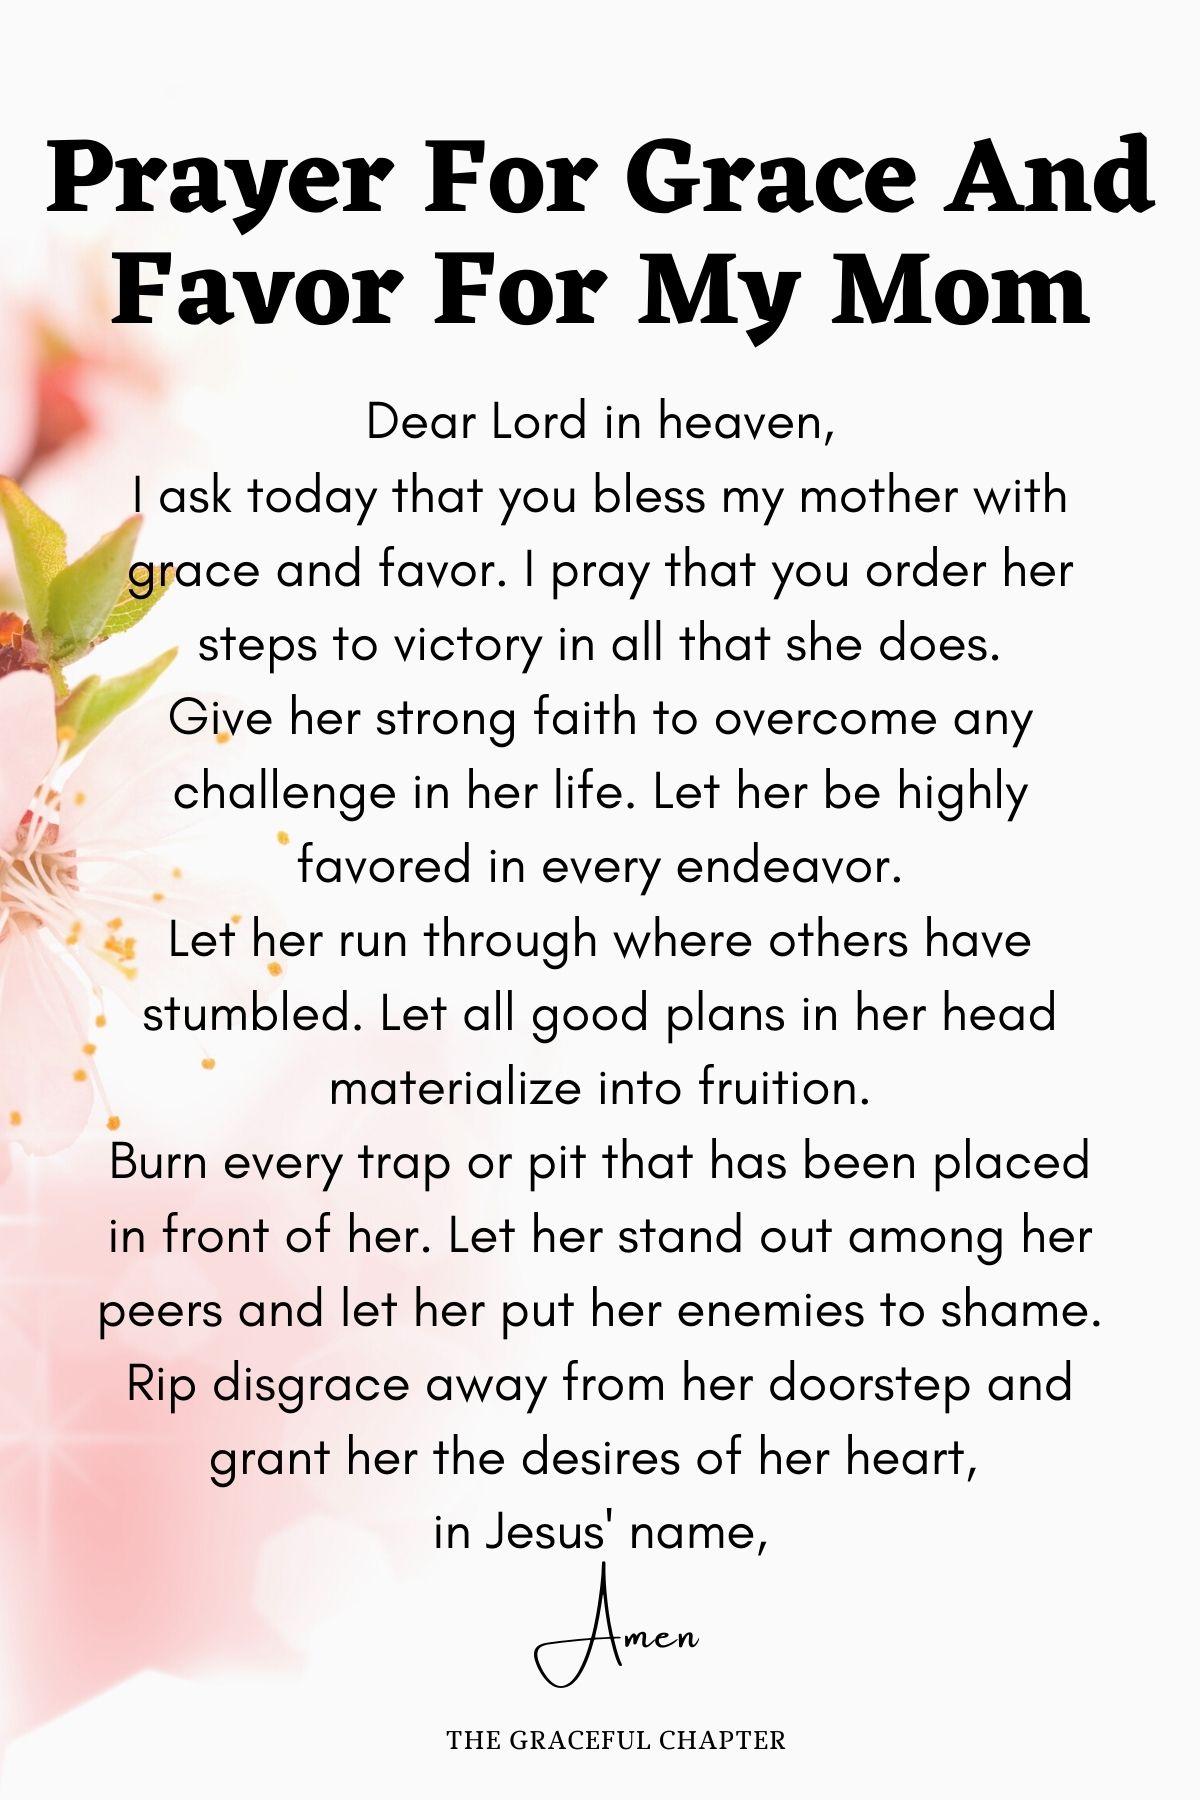 Prayer for grace and favor for my mom